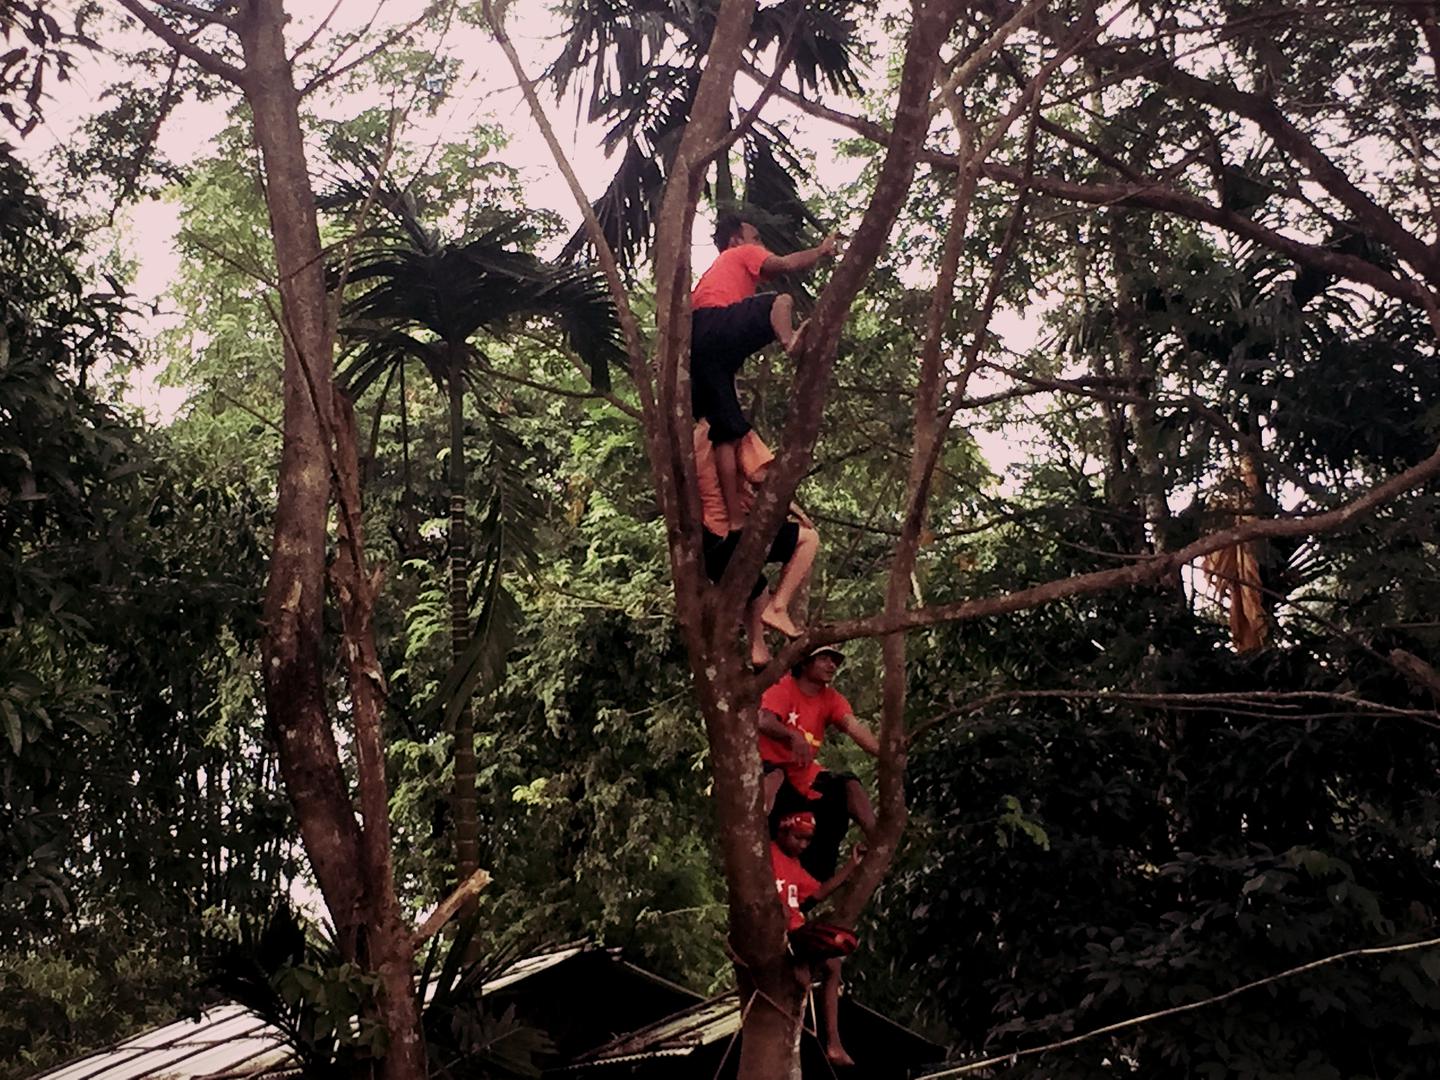 NLD supporters climb a tree to see the rally in Mandalay on October 28.